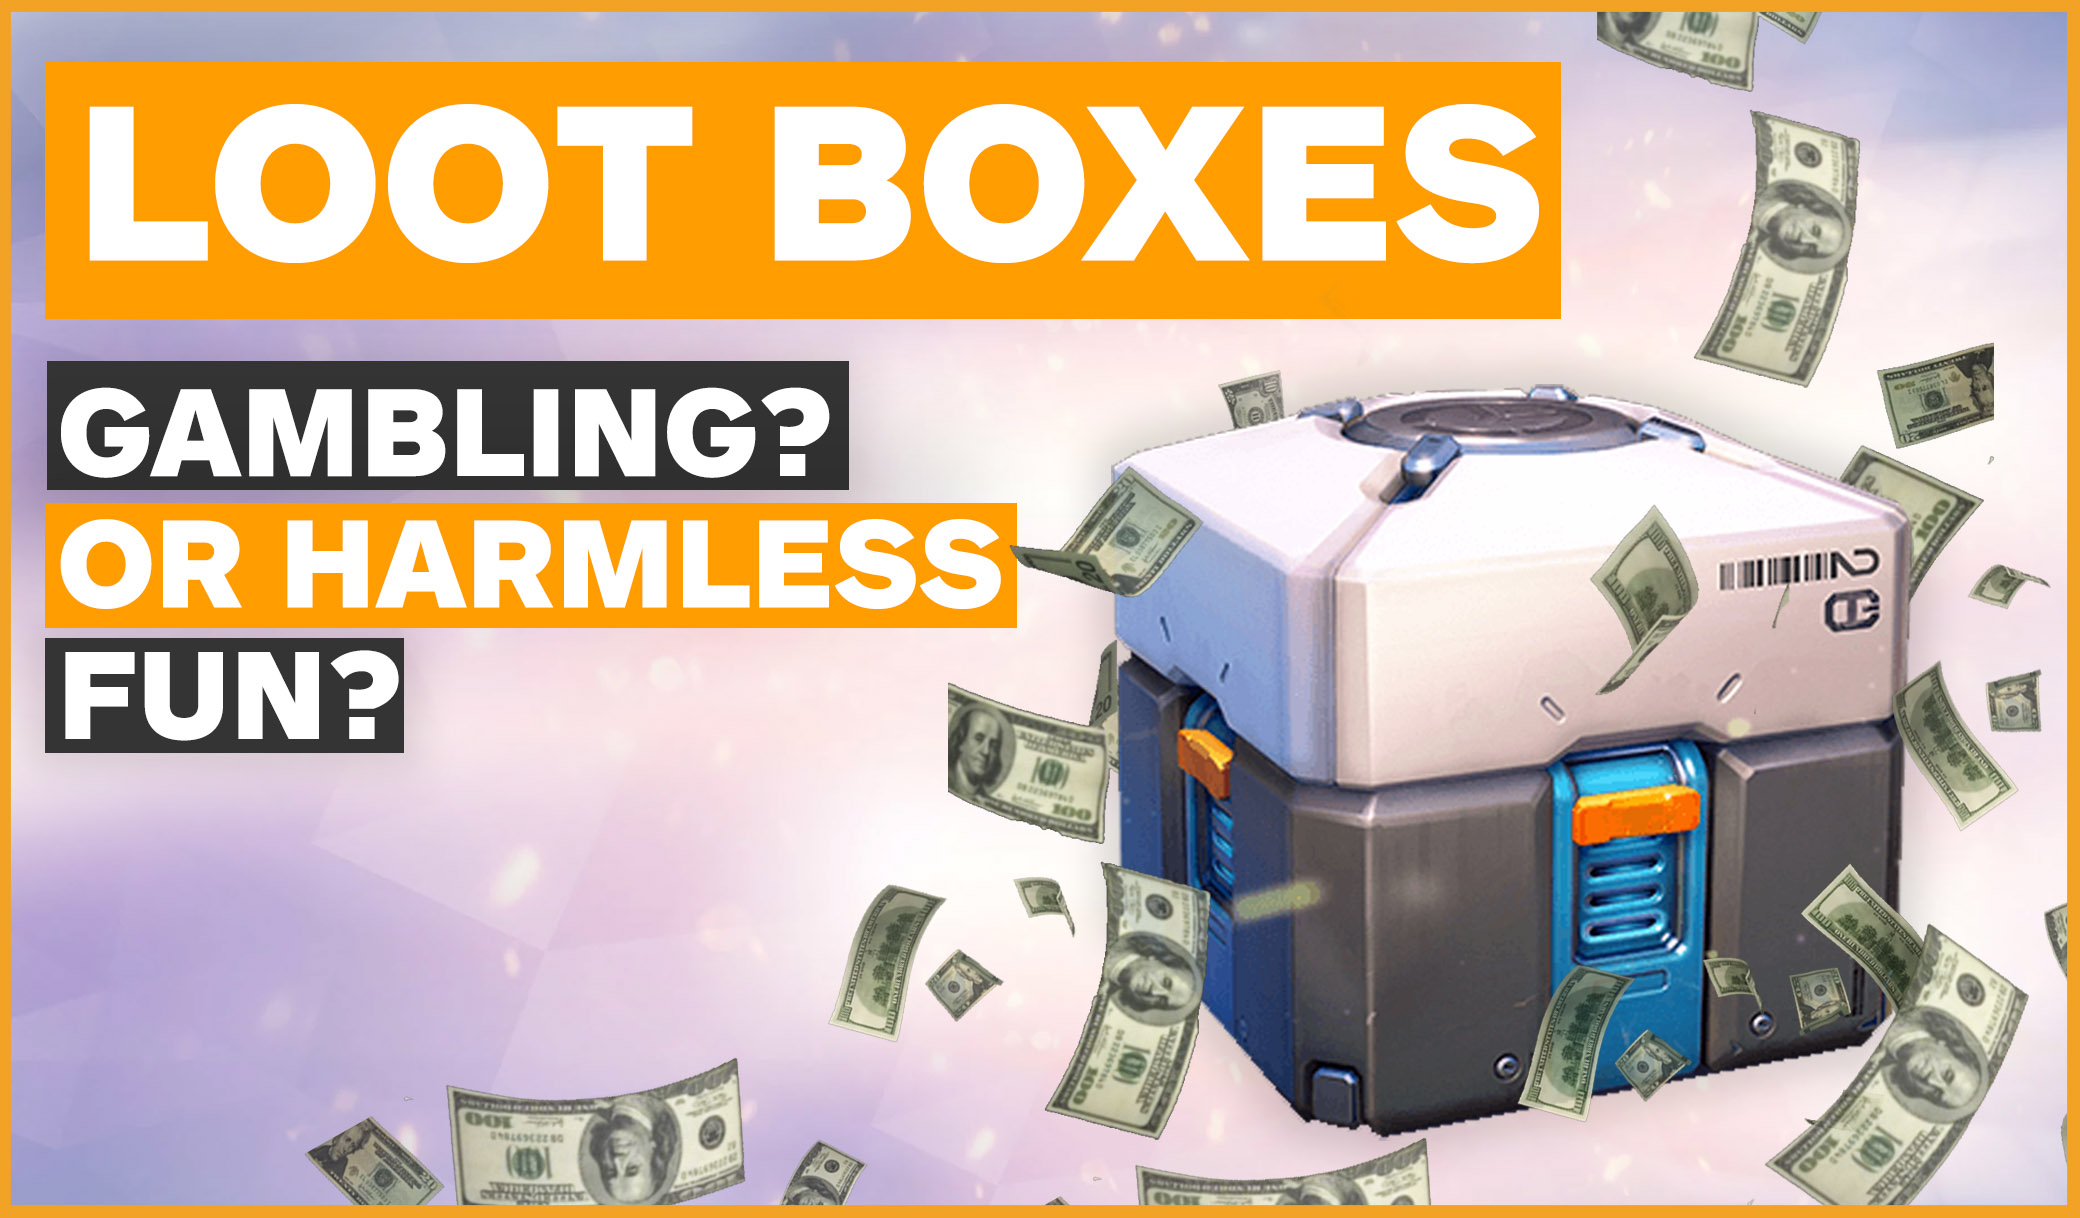 Loot boxes within video games